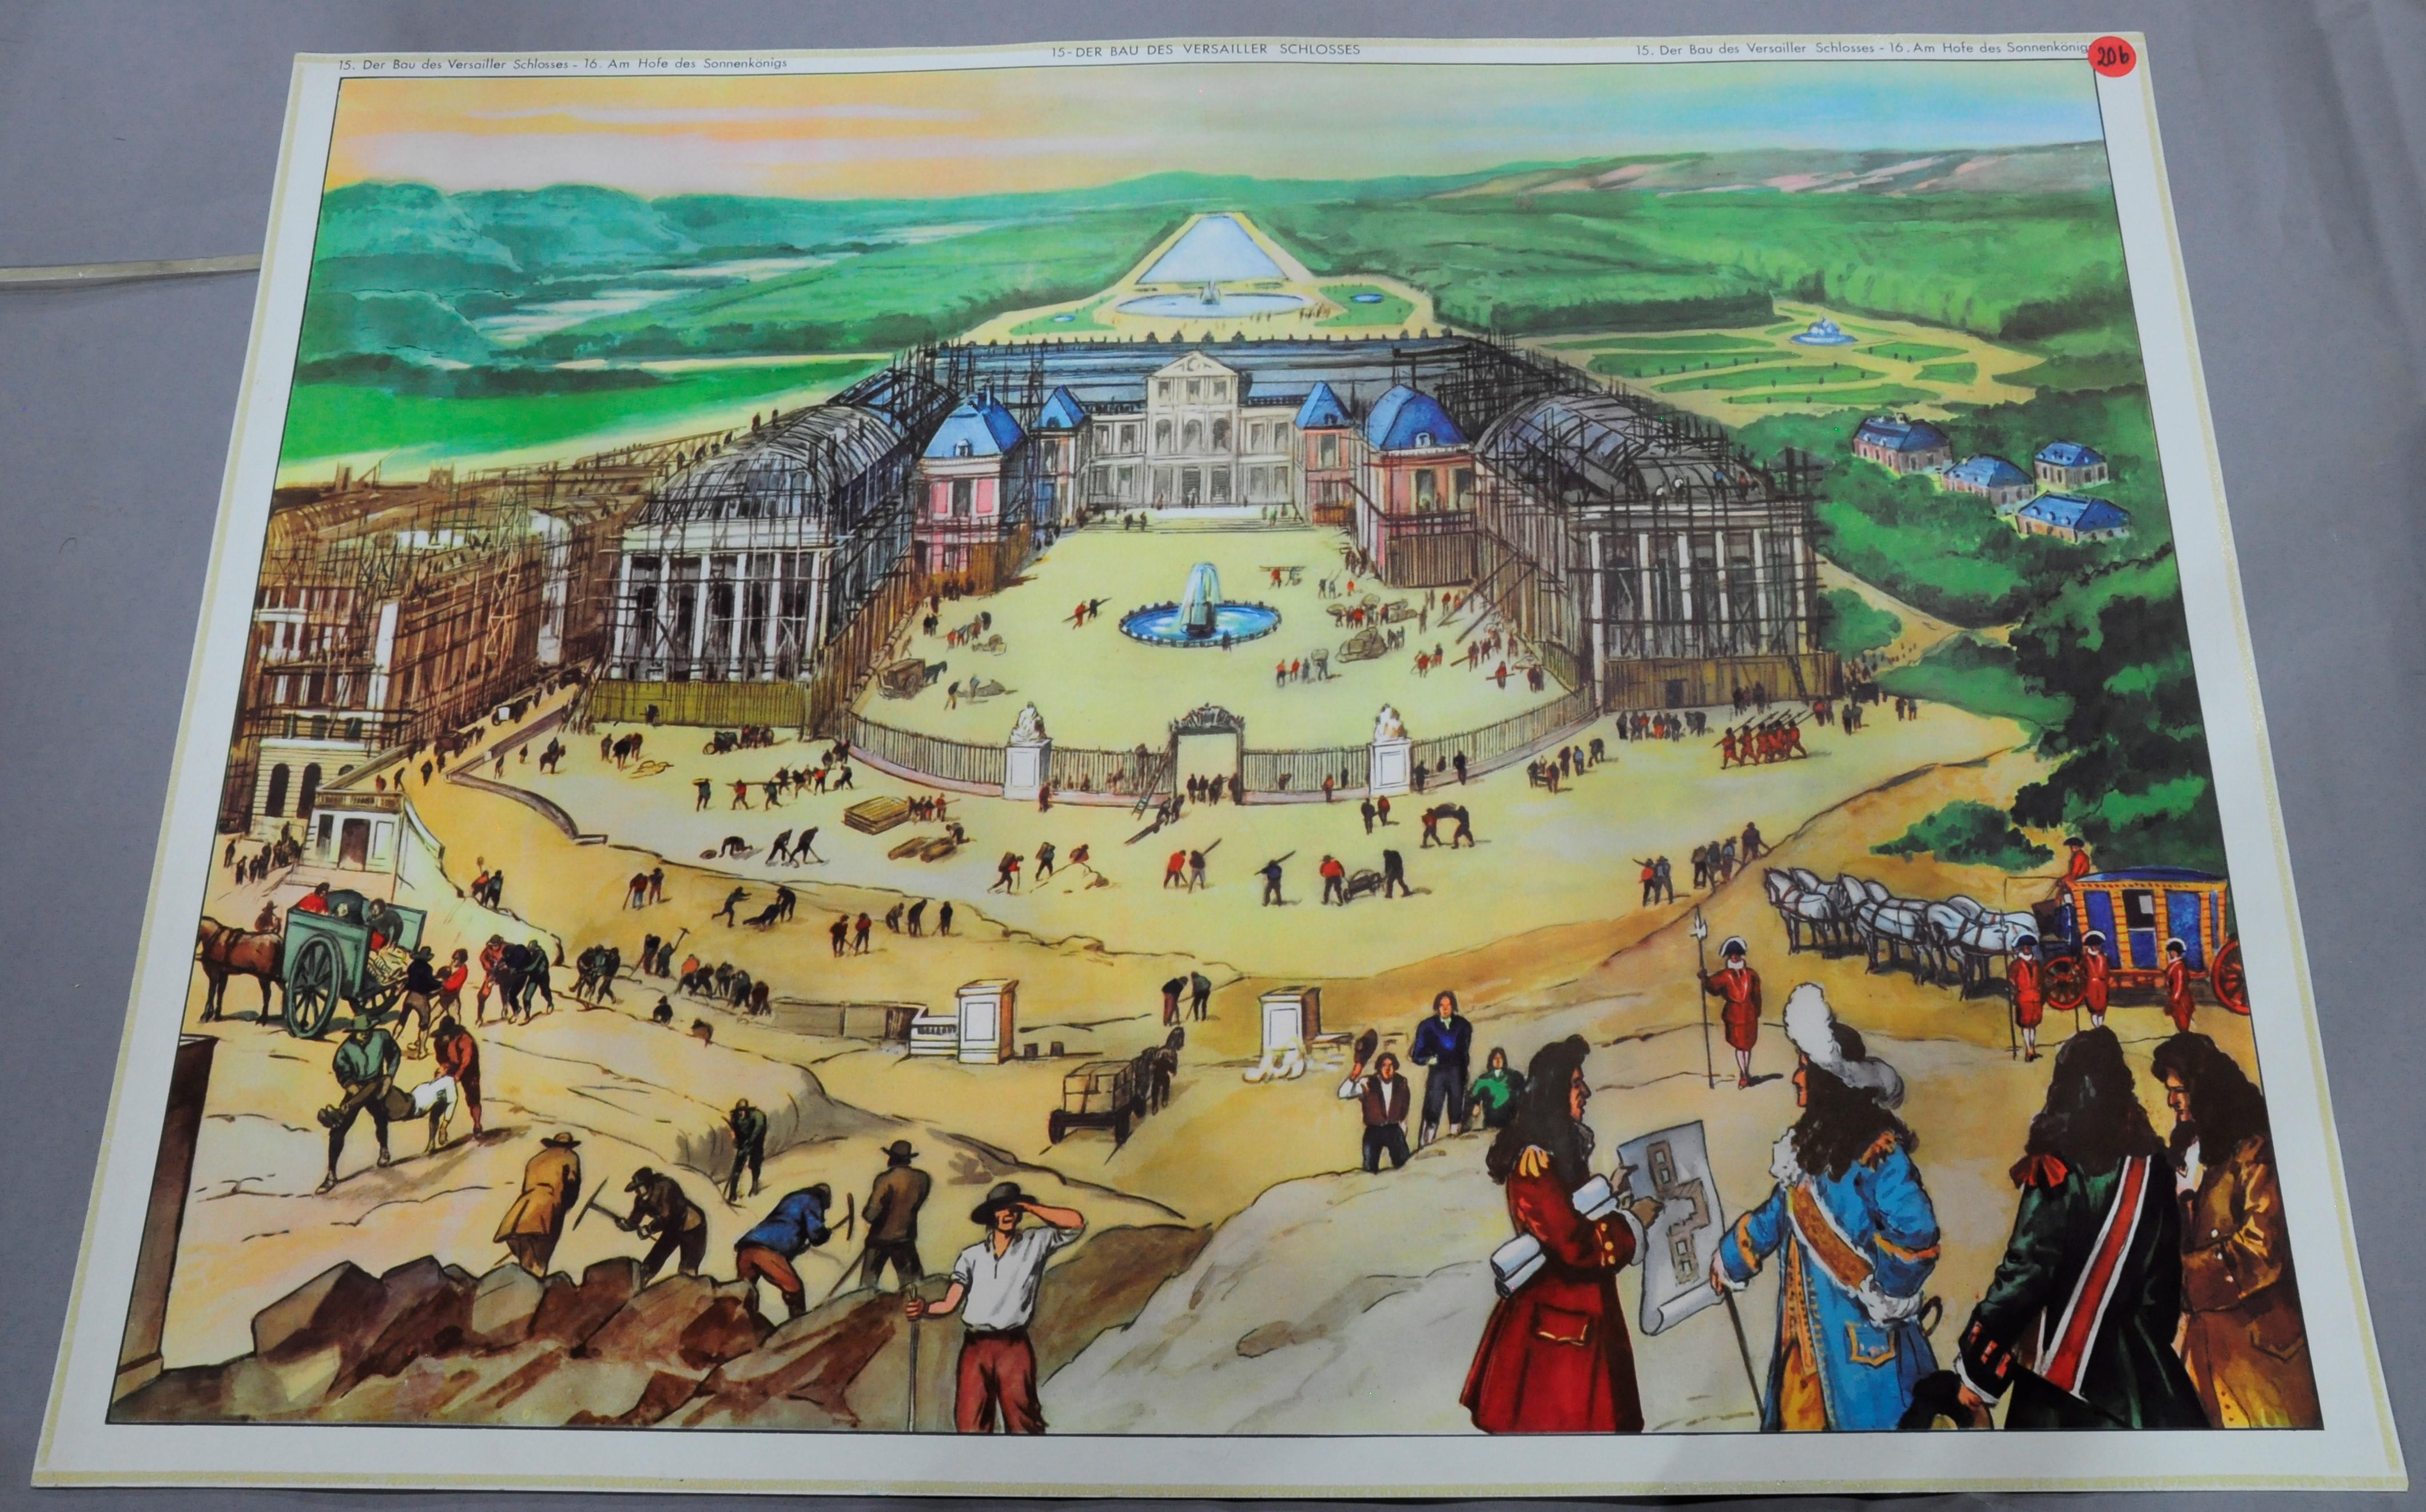 The double sided vintage poster shows the interior of the palace of the Sun King Louis XIV. and on the backside it shows the construction of the palace of Versailles. Colorful print on paper.
Measurements:
Width 76cm (29.92 inch)
Height 56 cm (22.05